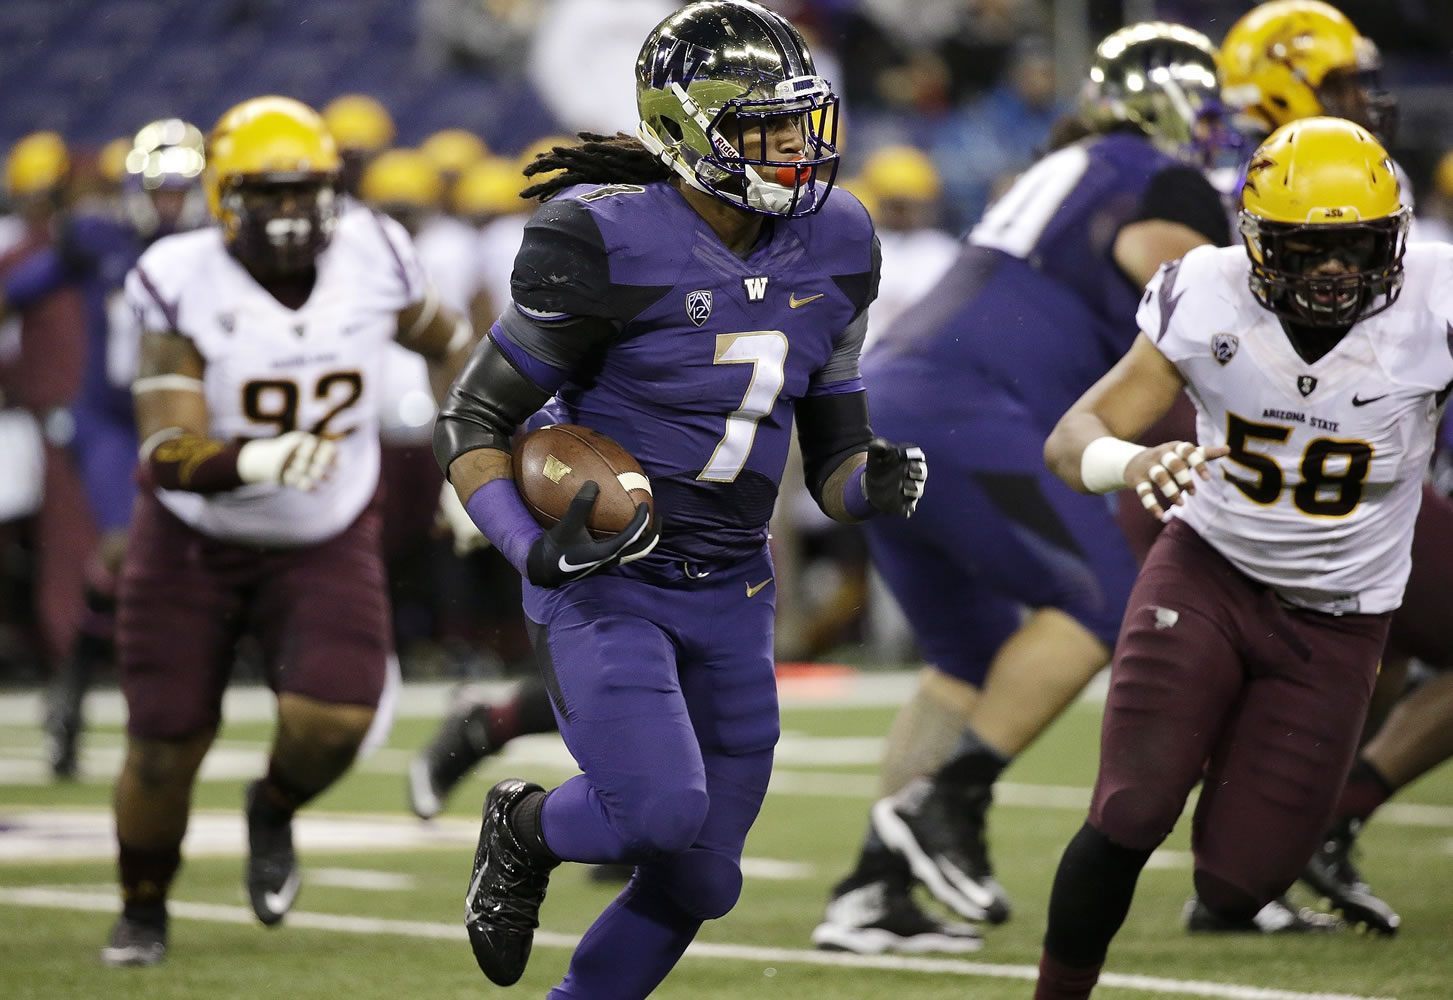 Washington's Shaq Thompson carries against Arizona State during the first half Saturday, Oct. 25, 2014, in Seattle.